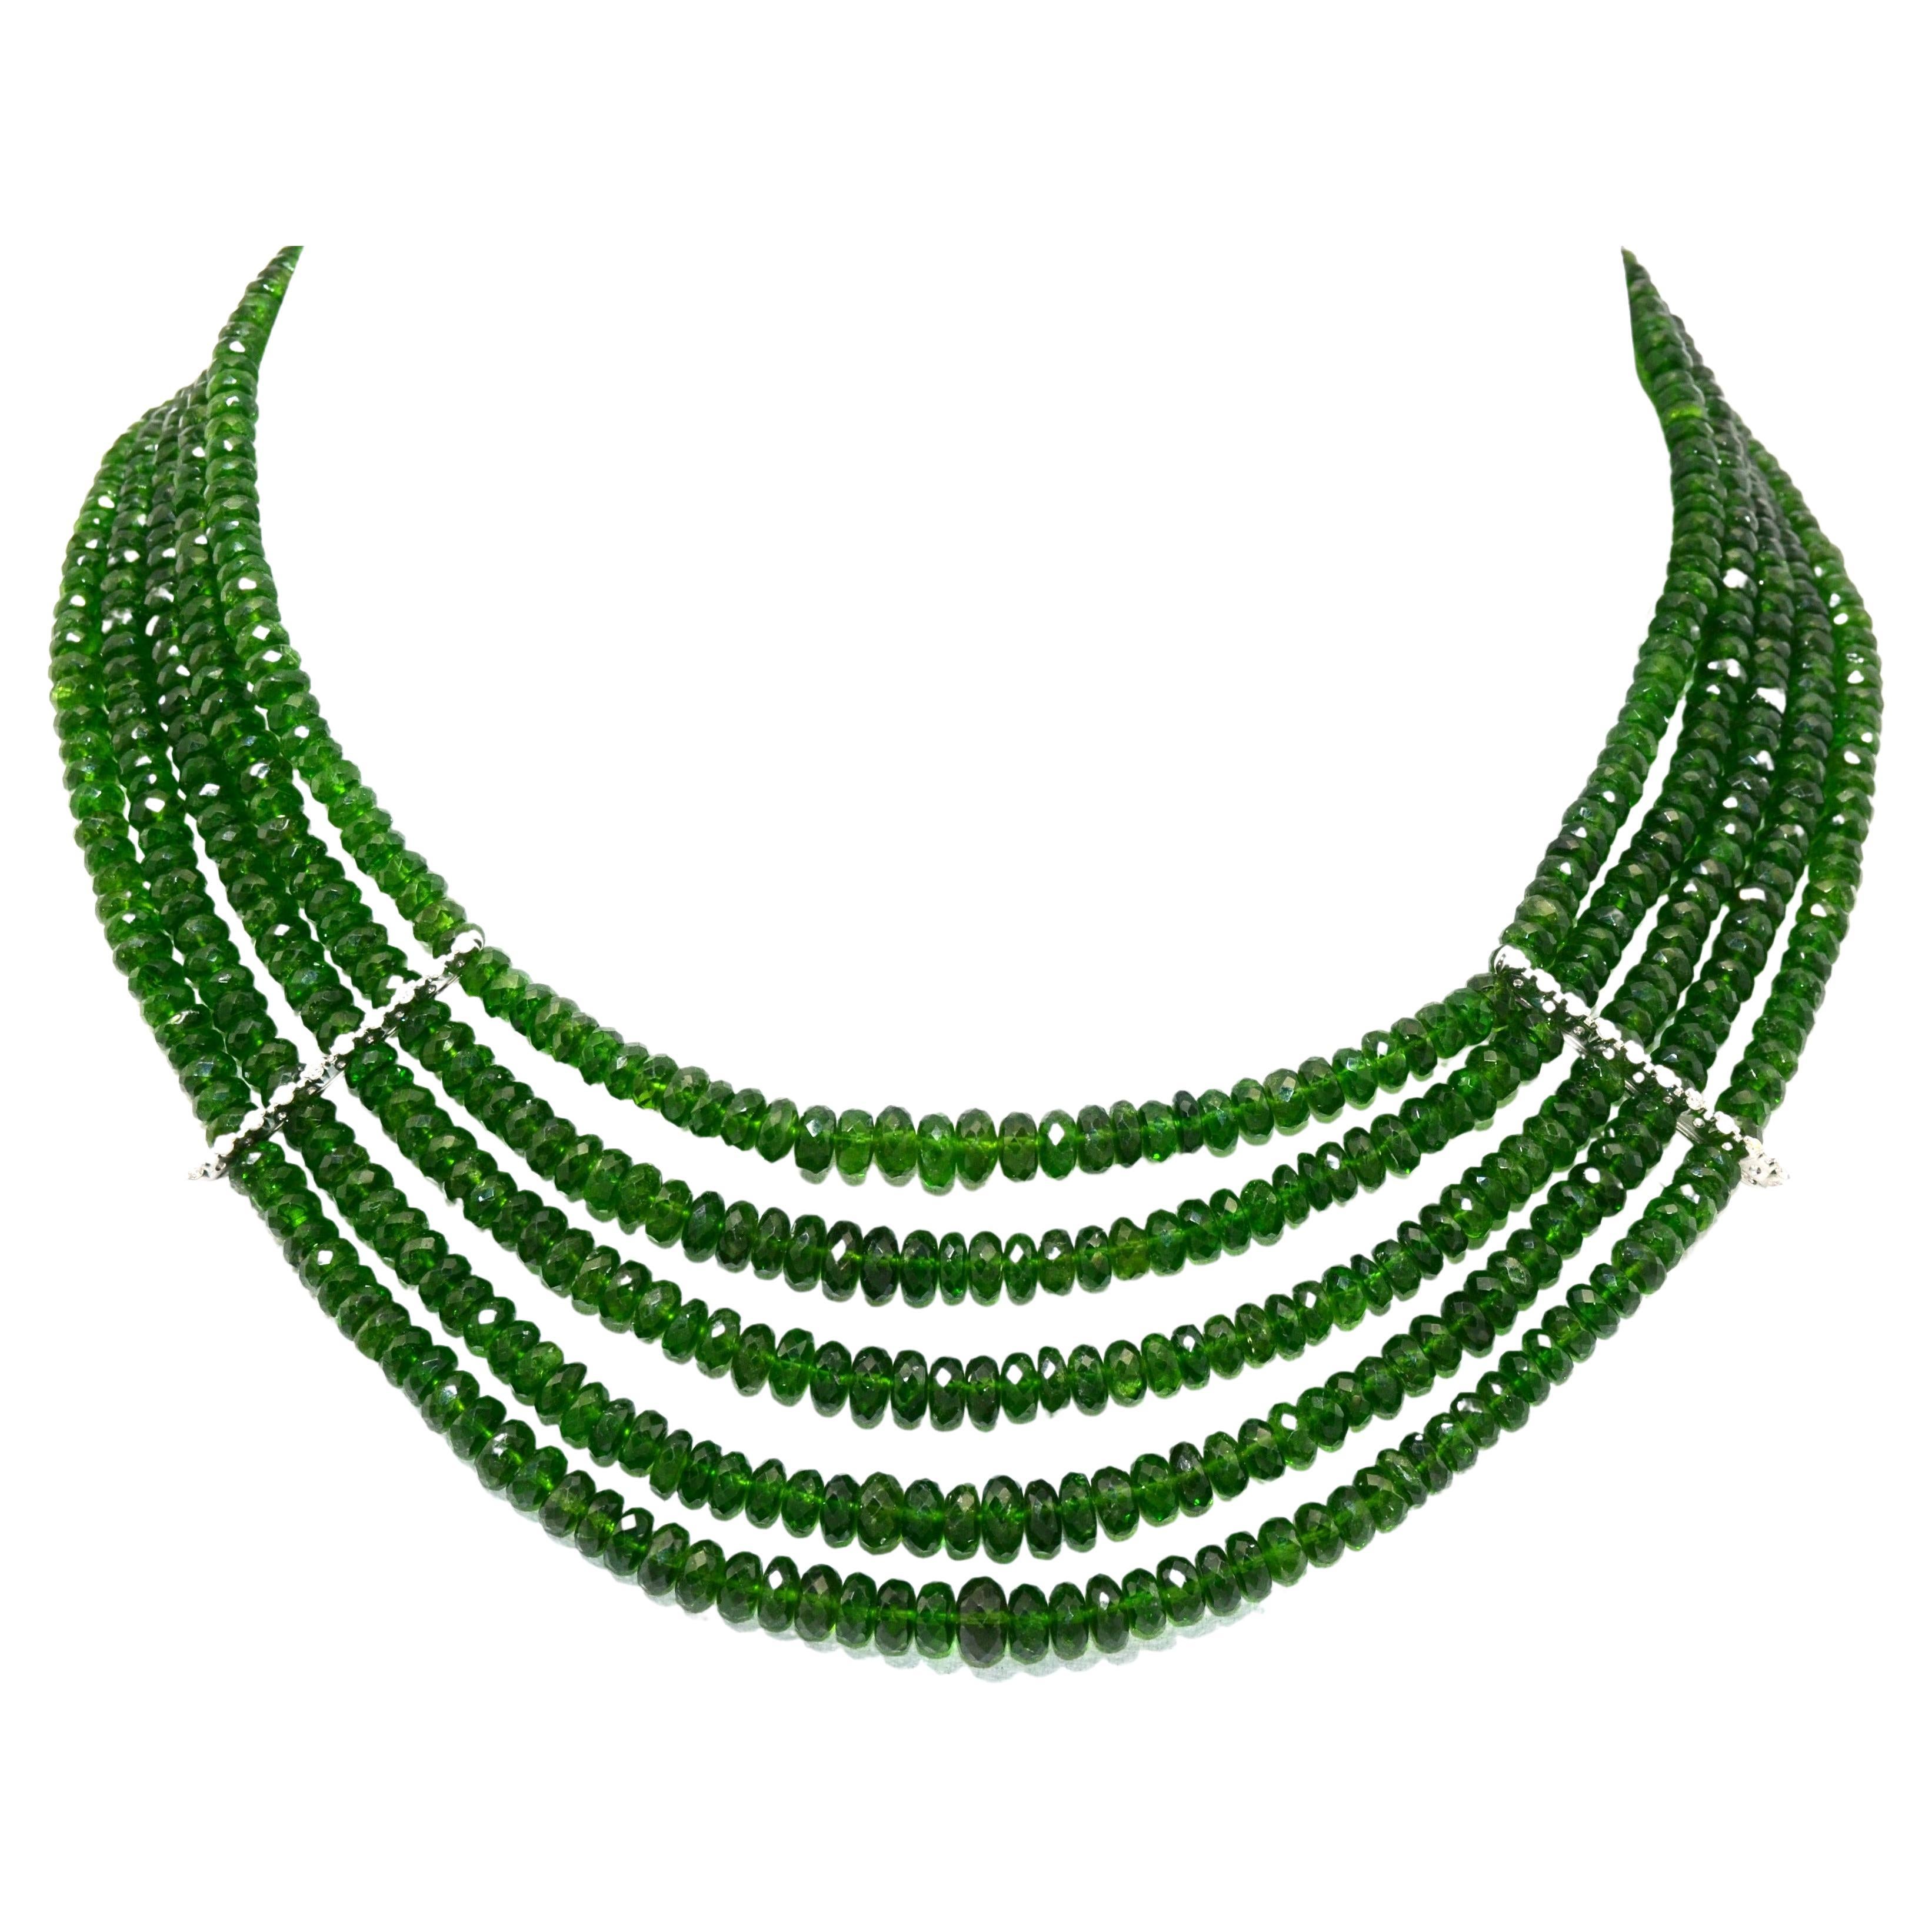 Sparkling natural vivid green tourmalines necklace, made of 5 strands of faceted round degradé beads.
Detailed by a line of diamonds, set on white gold, one each side of the necklace.
Same style clasp decorated by diamonds and a short tassel of